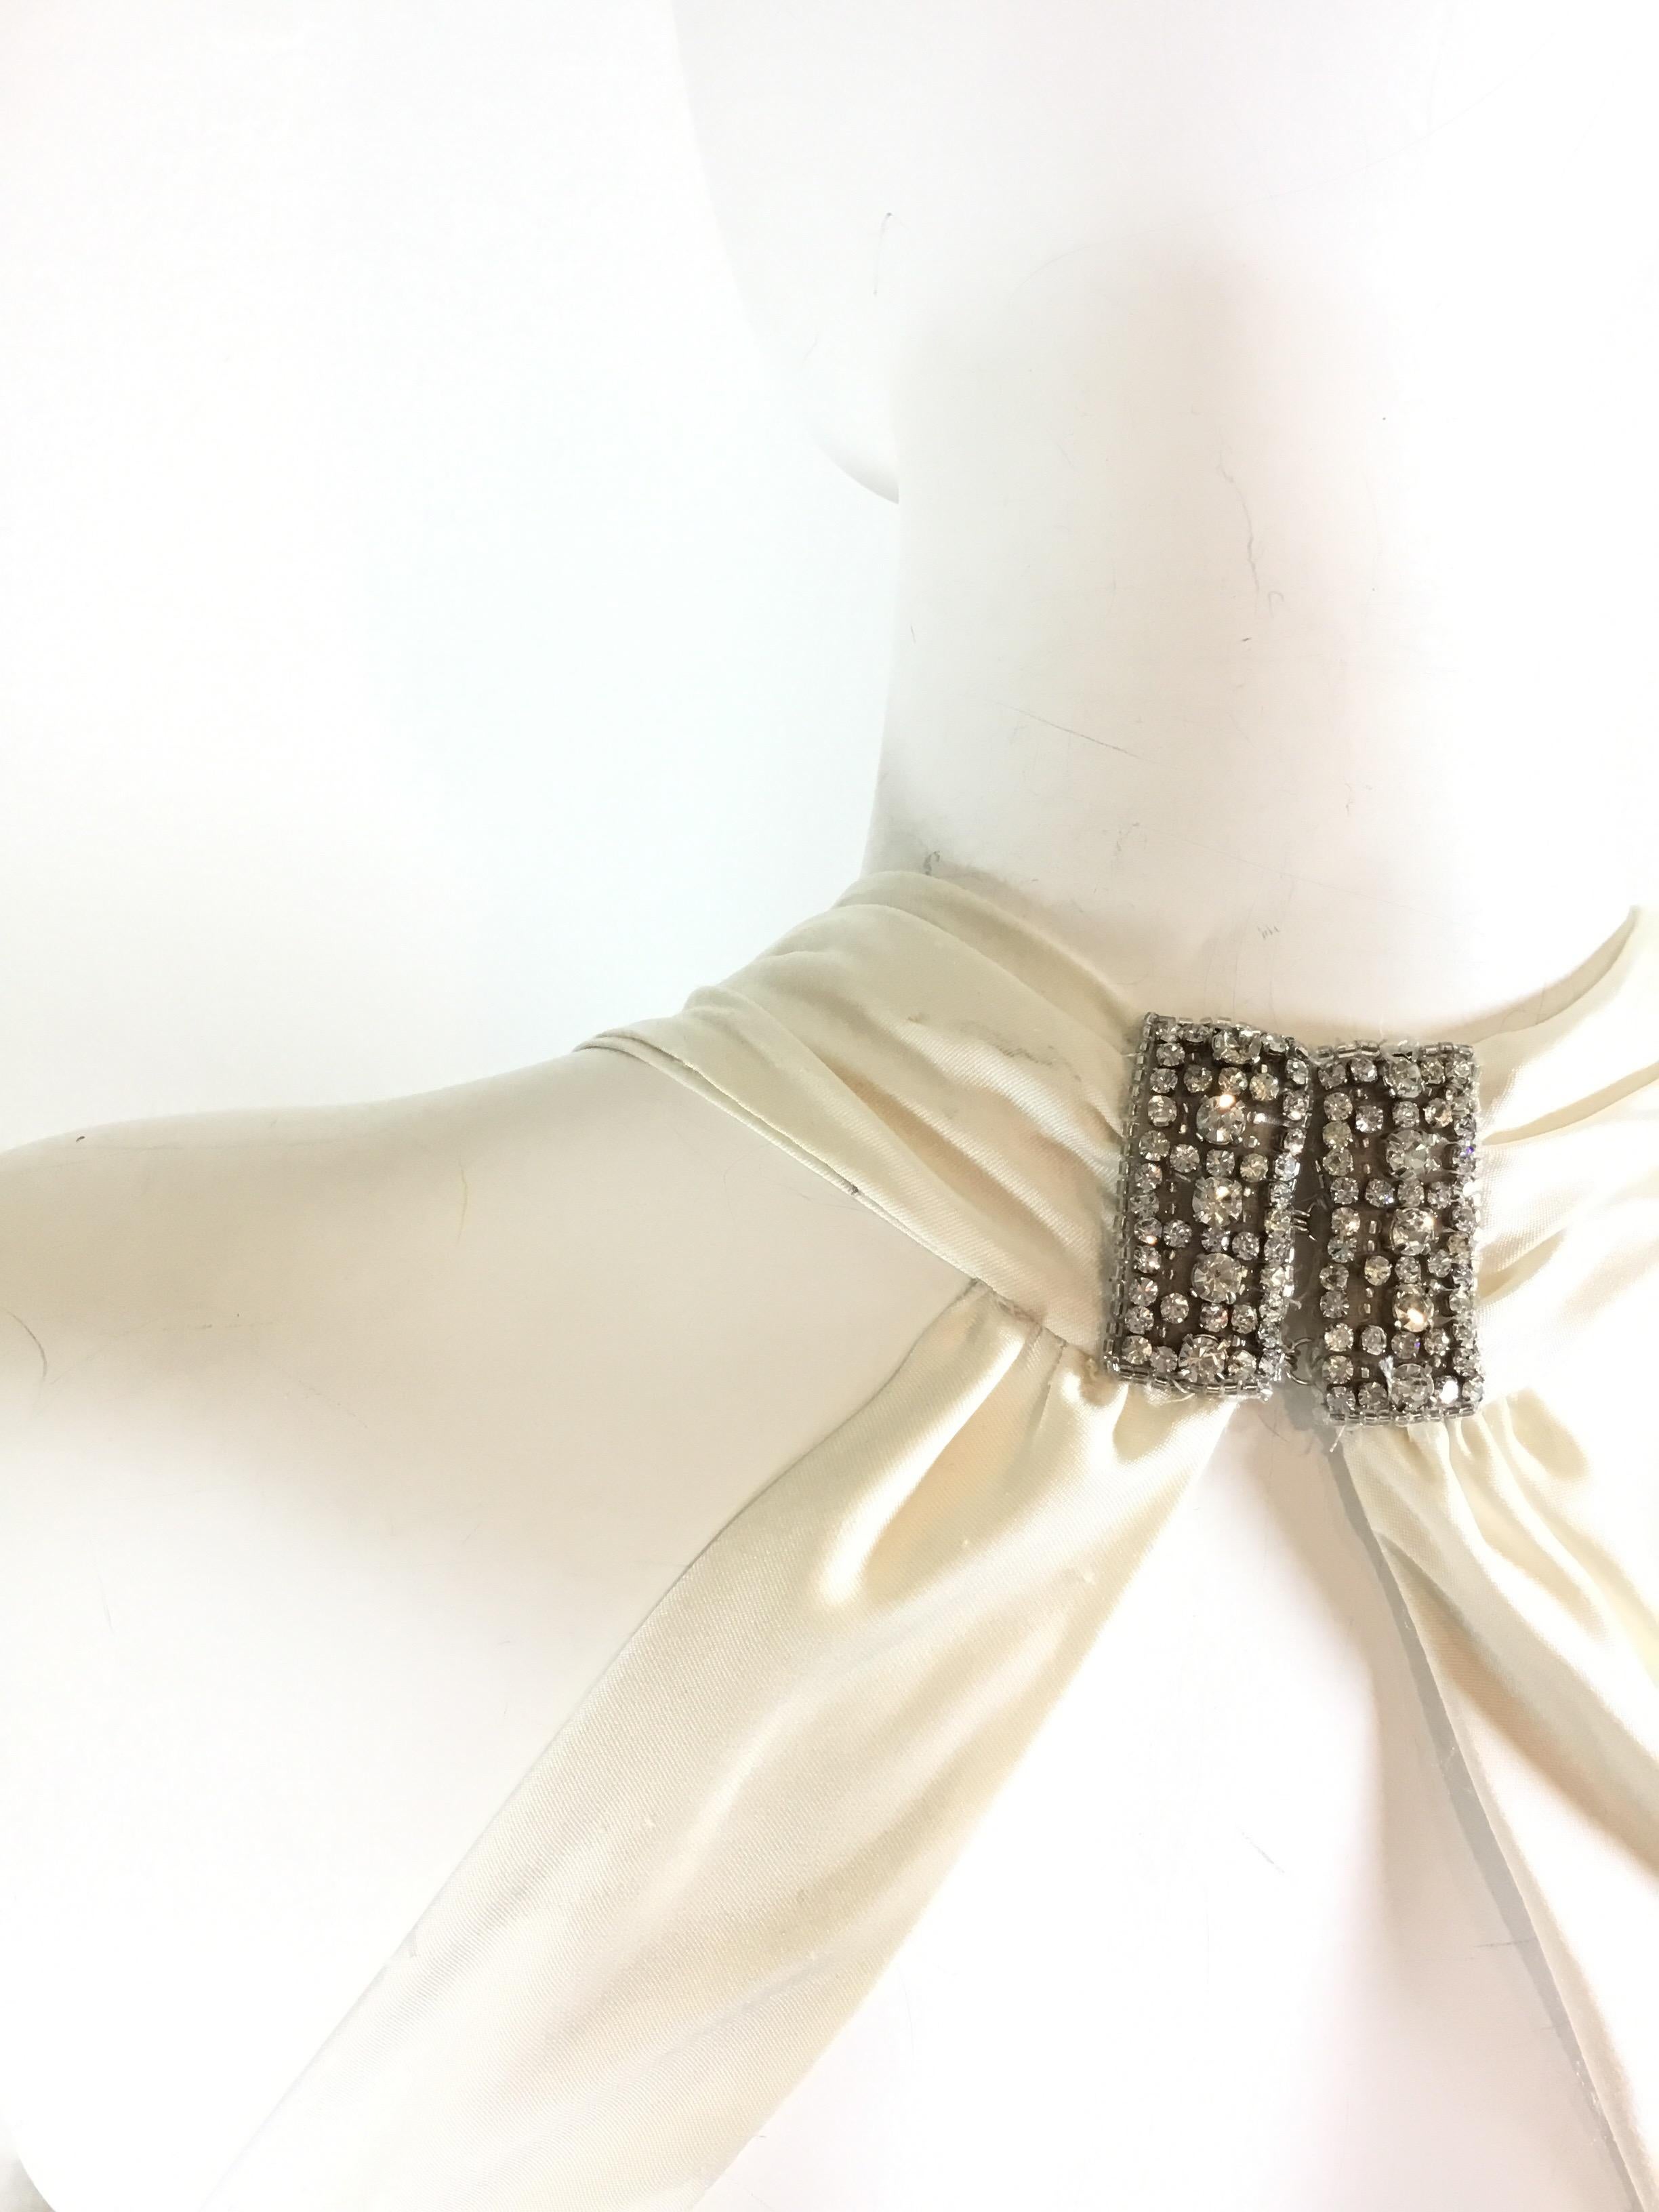 2006 Chanel Silk Satin Formal Dress with Rhinestones In Excellent Condition For Sale In Carmel, CA